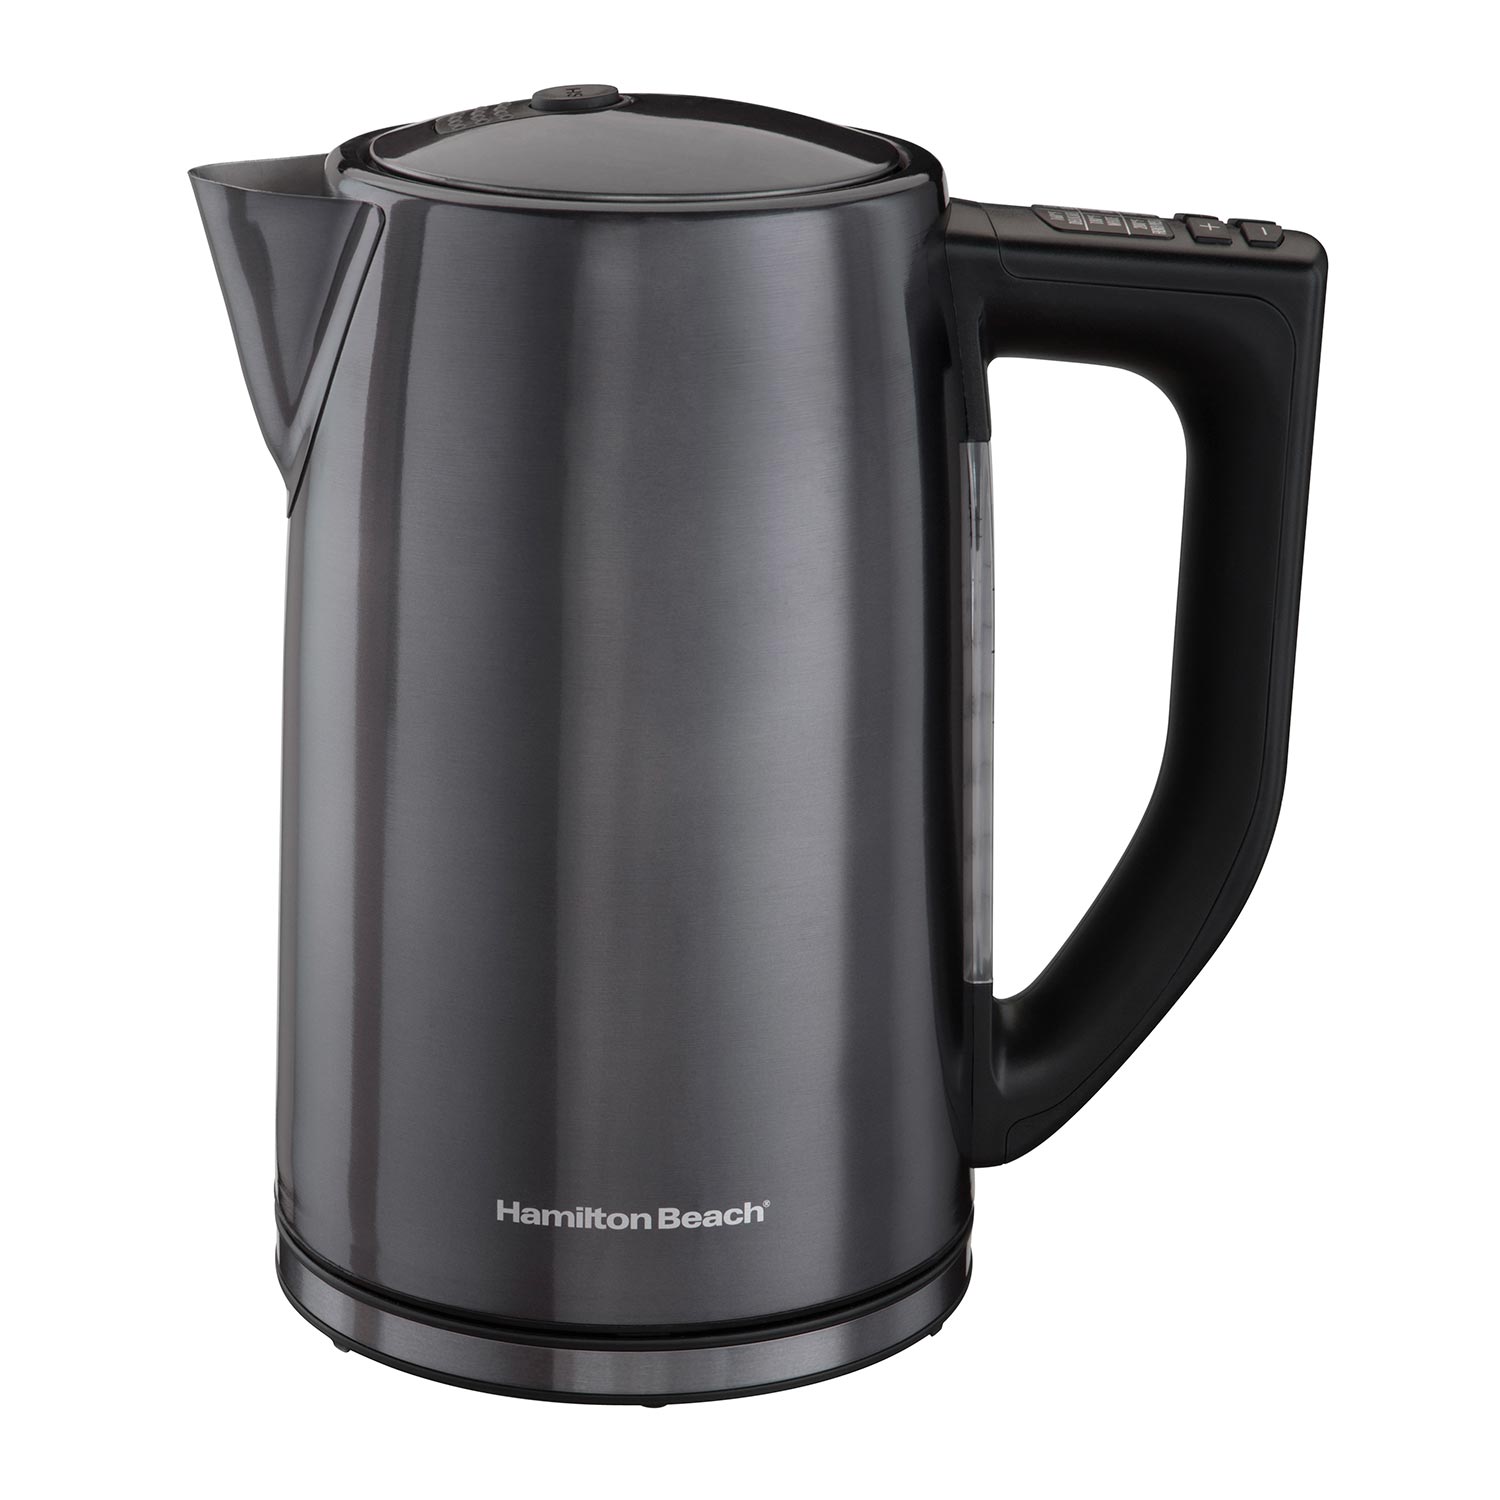 1.7 Liter Variable Temperature Electric Kettle, Black & Stainless Steel (41027R)